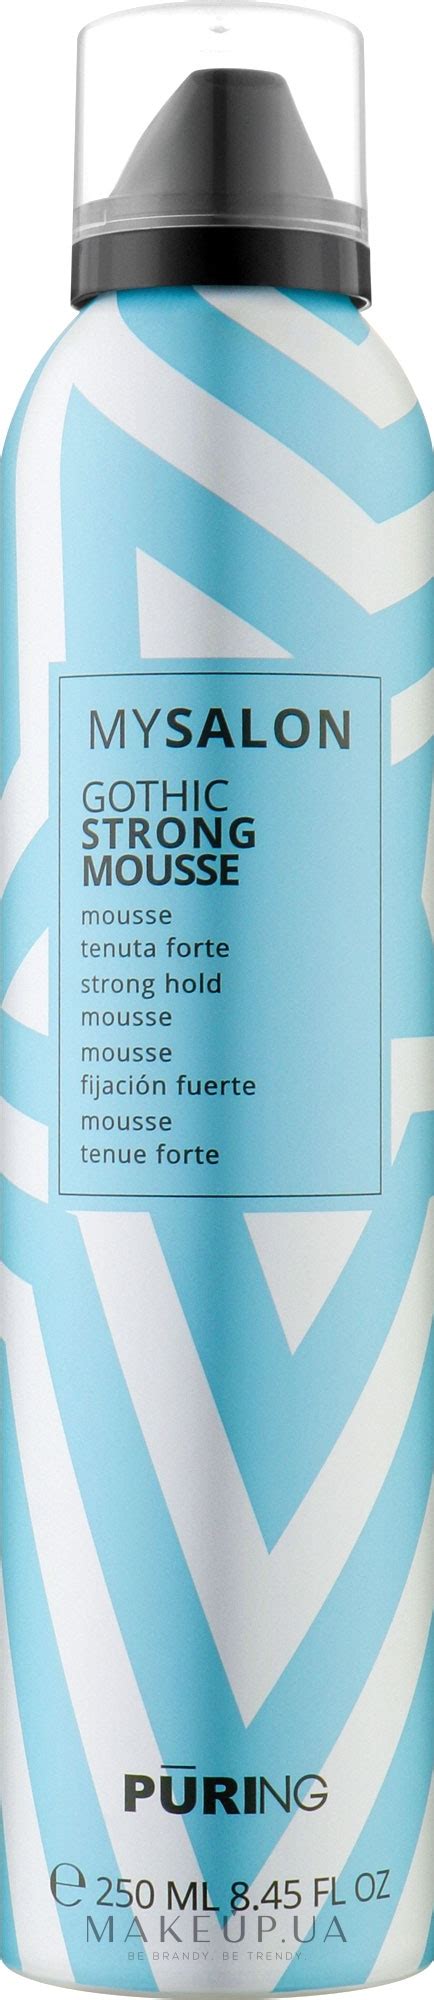 Puring Mysalon Gothic Strong Mousse